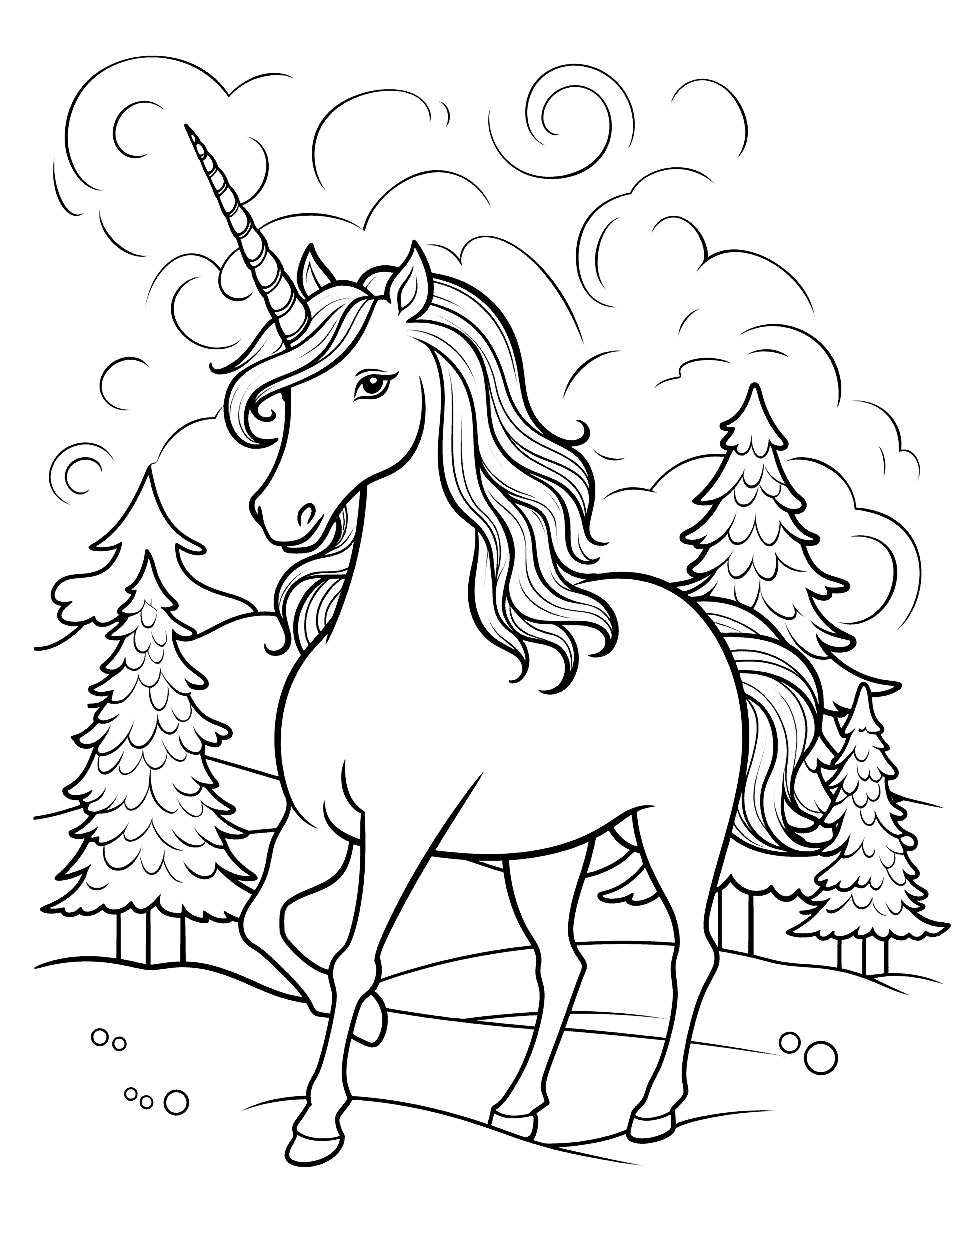 Winter Wonderland Unicorn Coloring Page - A unicorn frolicking in the snow, with a snowy landscape including pines.